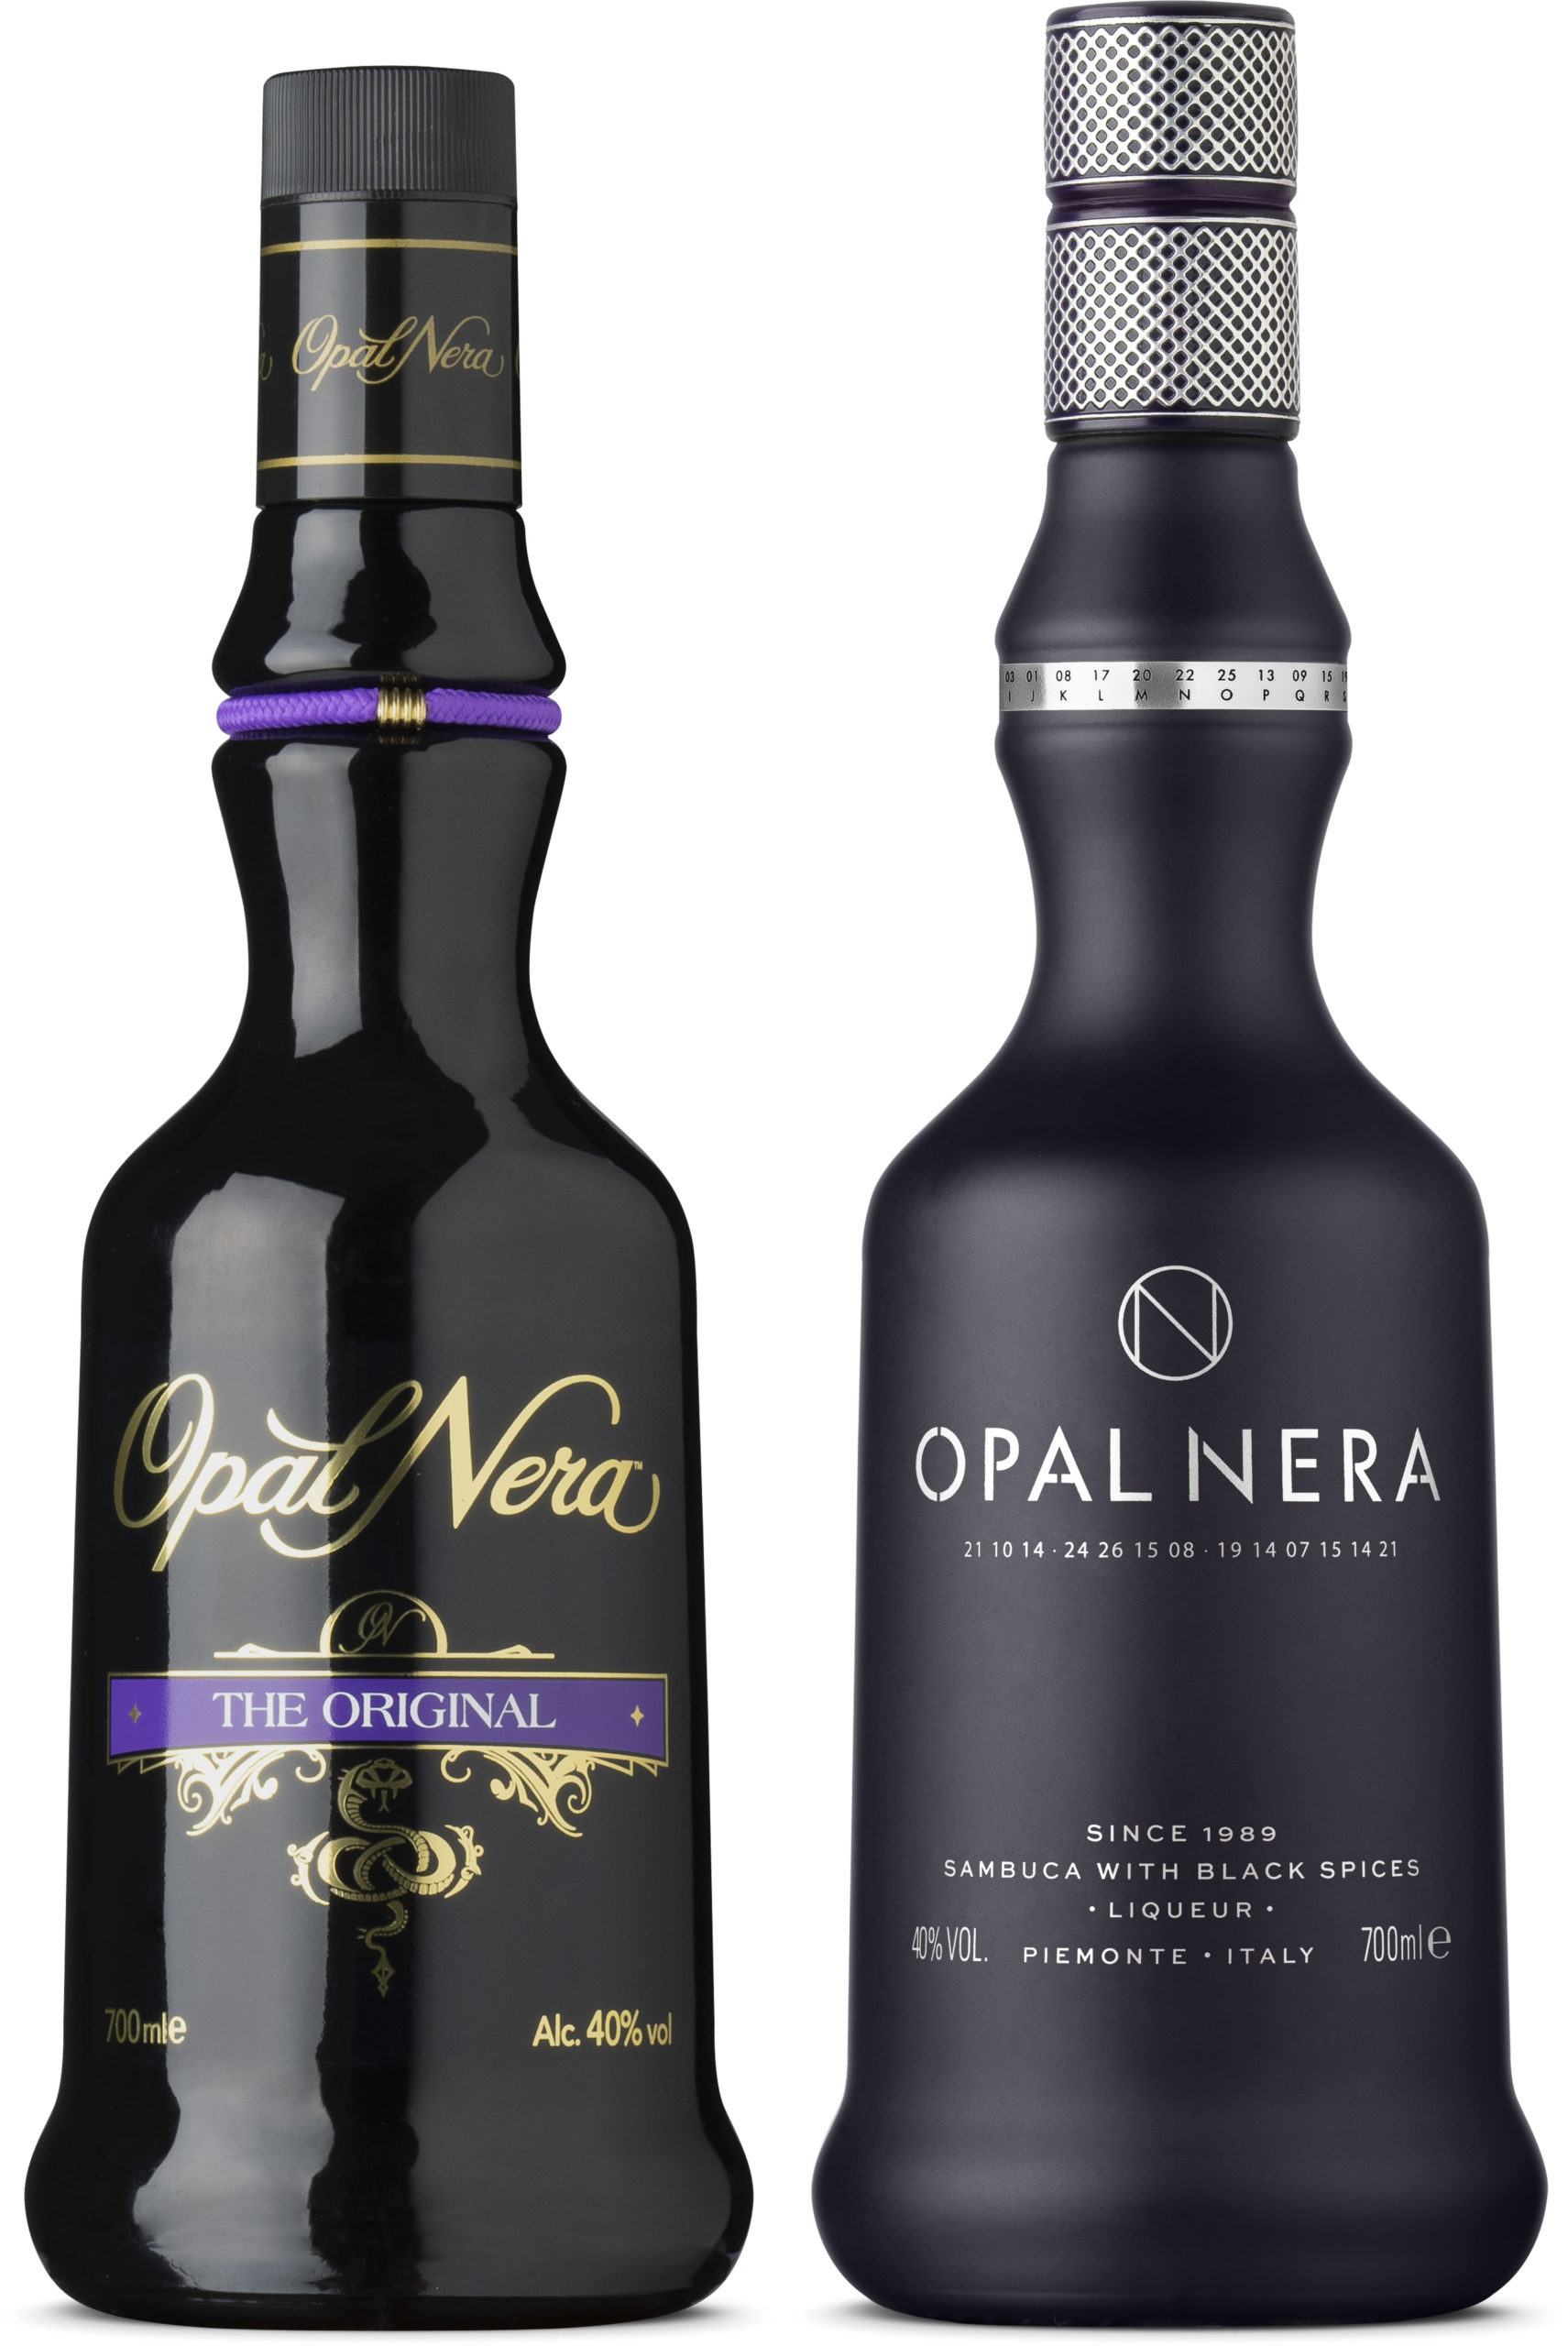 Opal Nera Beauty Duo Old and New White